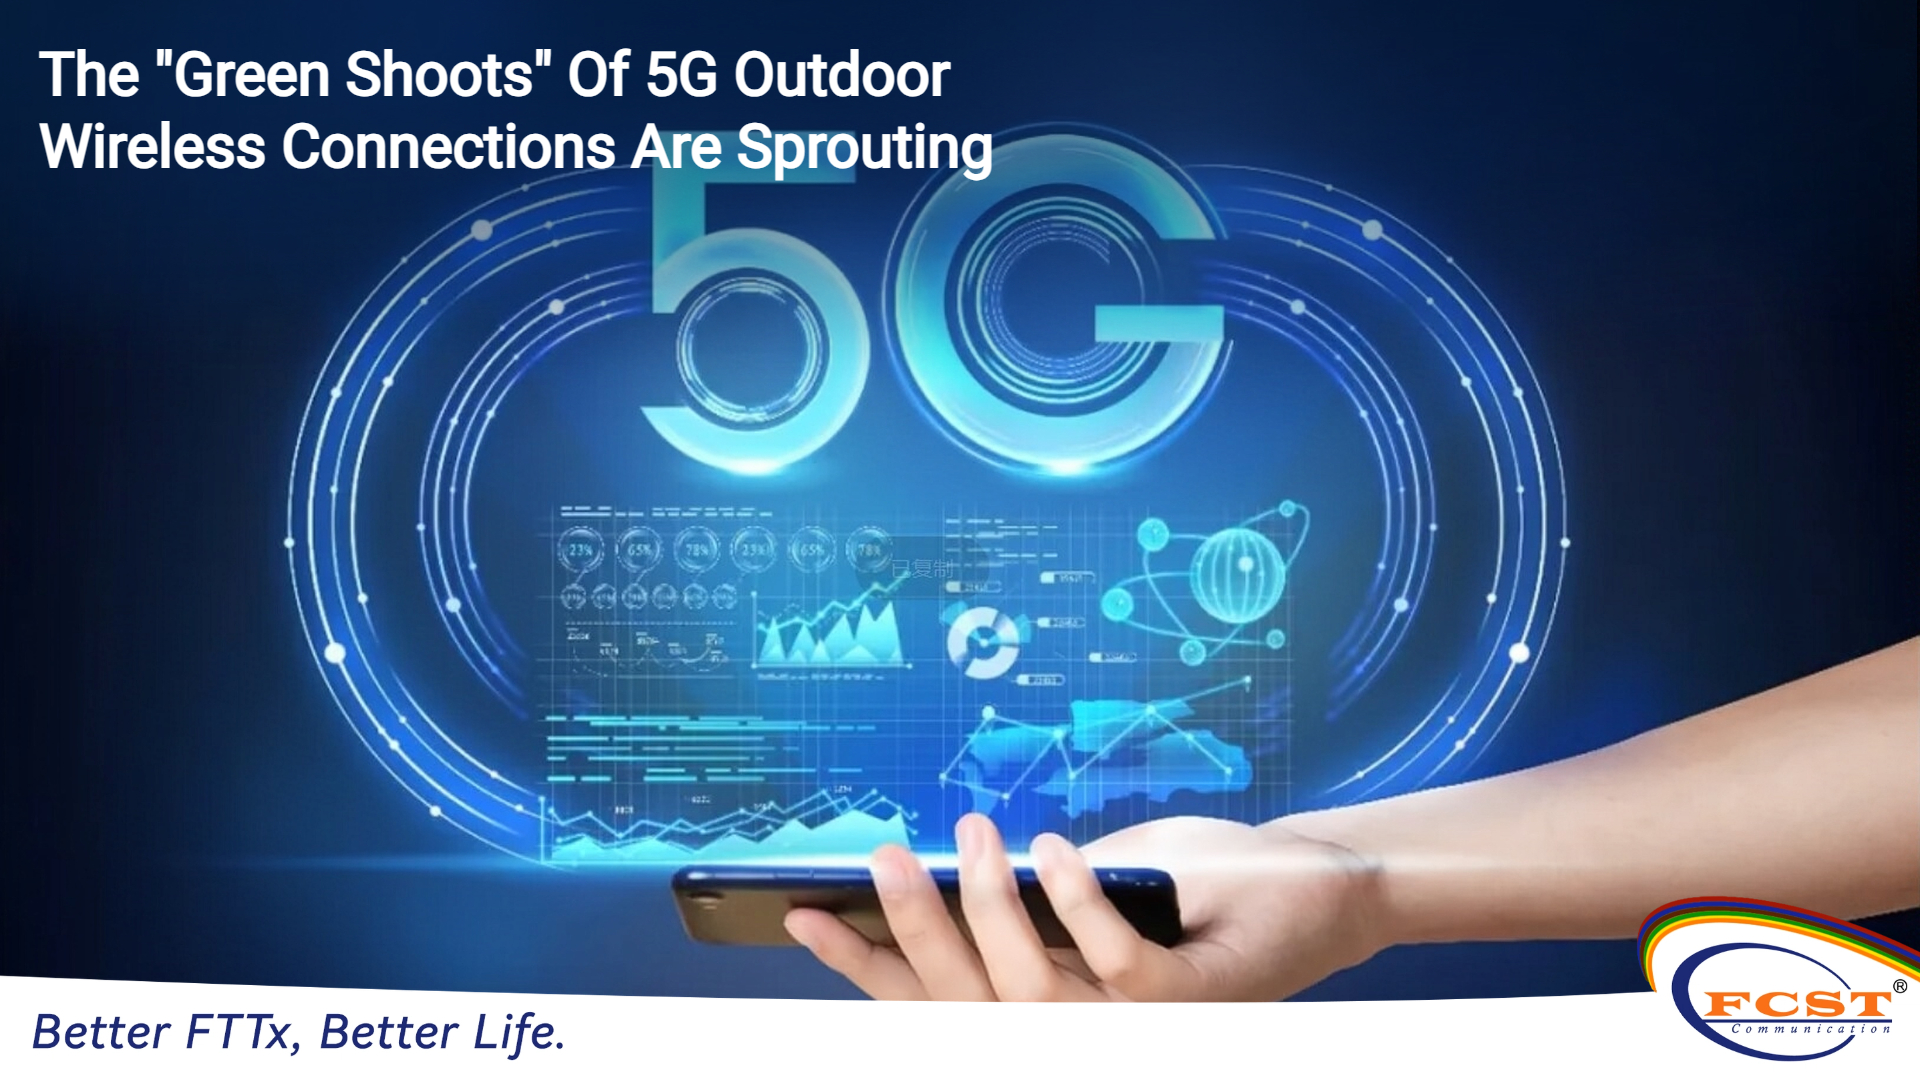 The "Green Shoots" Of 5G Outdoor Wireless Connections Are Sprouting